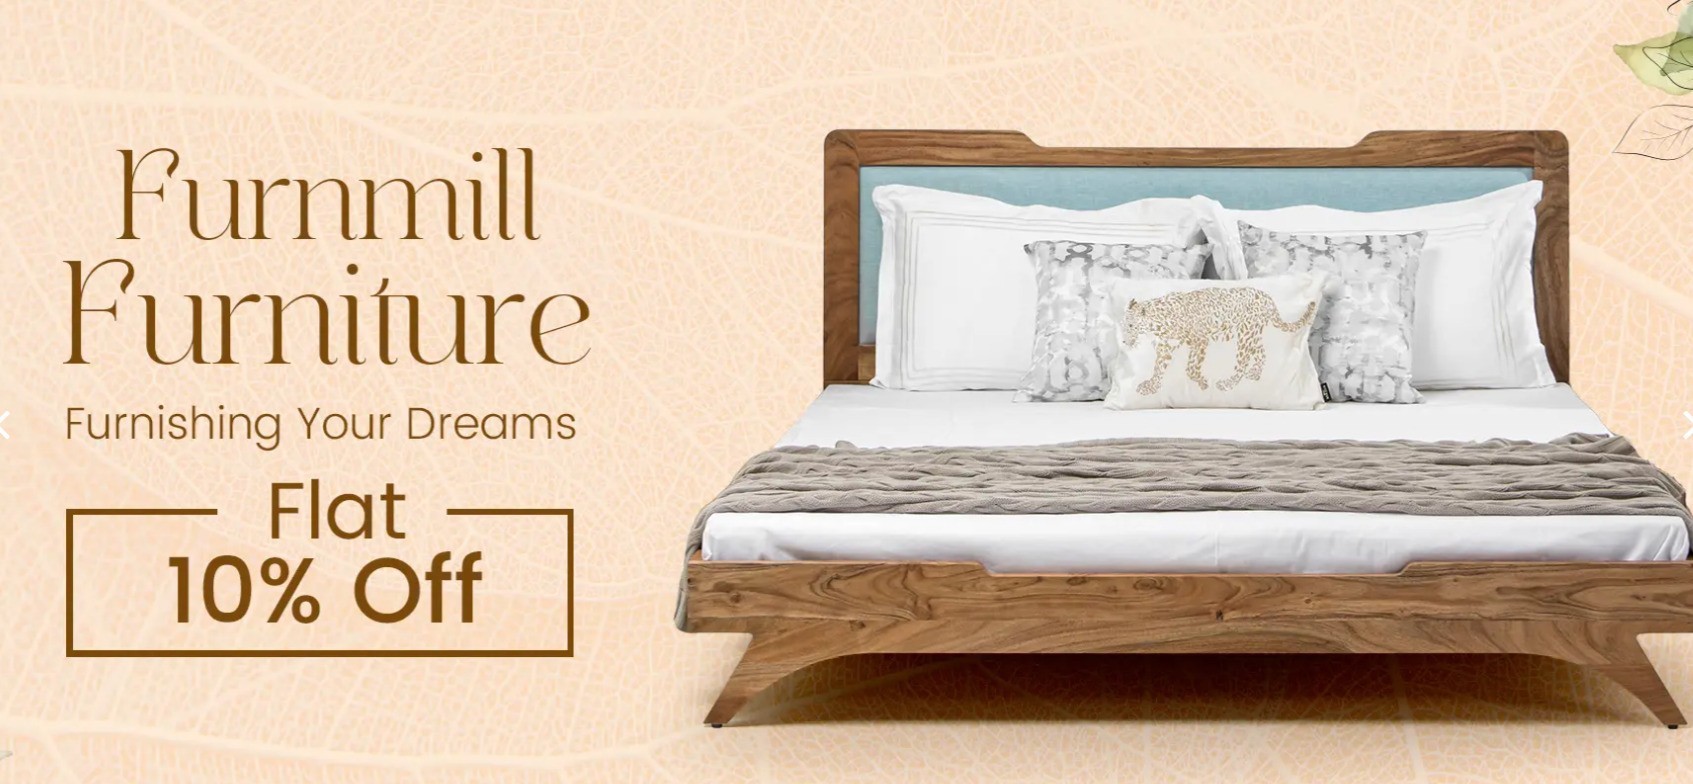 Shop for Furniture on Flat 10% Sale at Furnmill